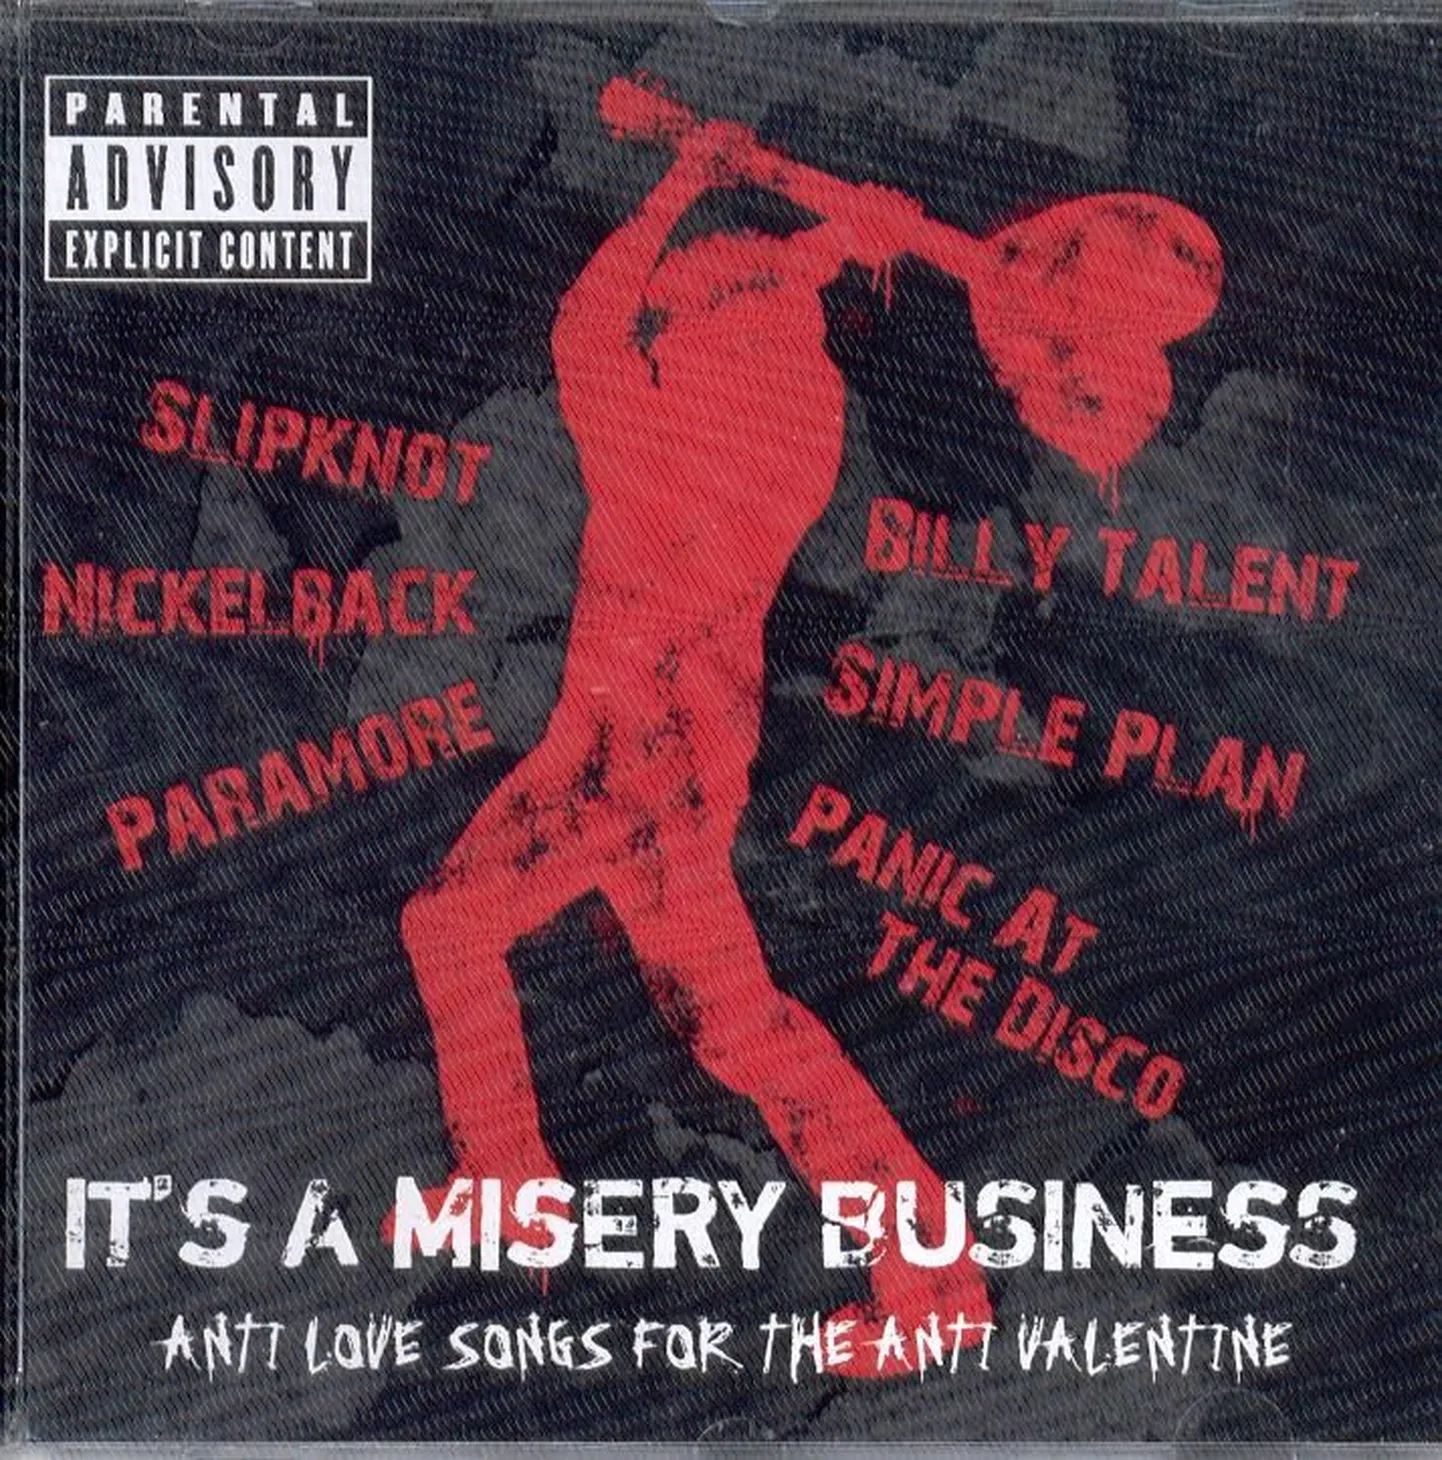 “It’s A Misery Business”.